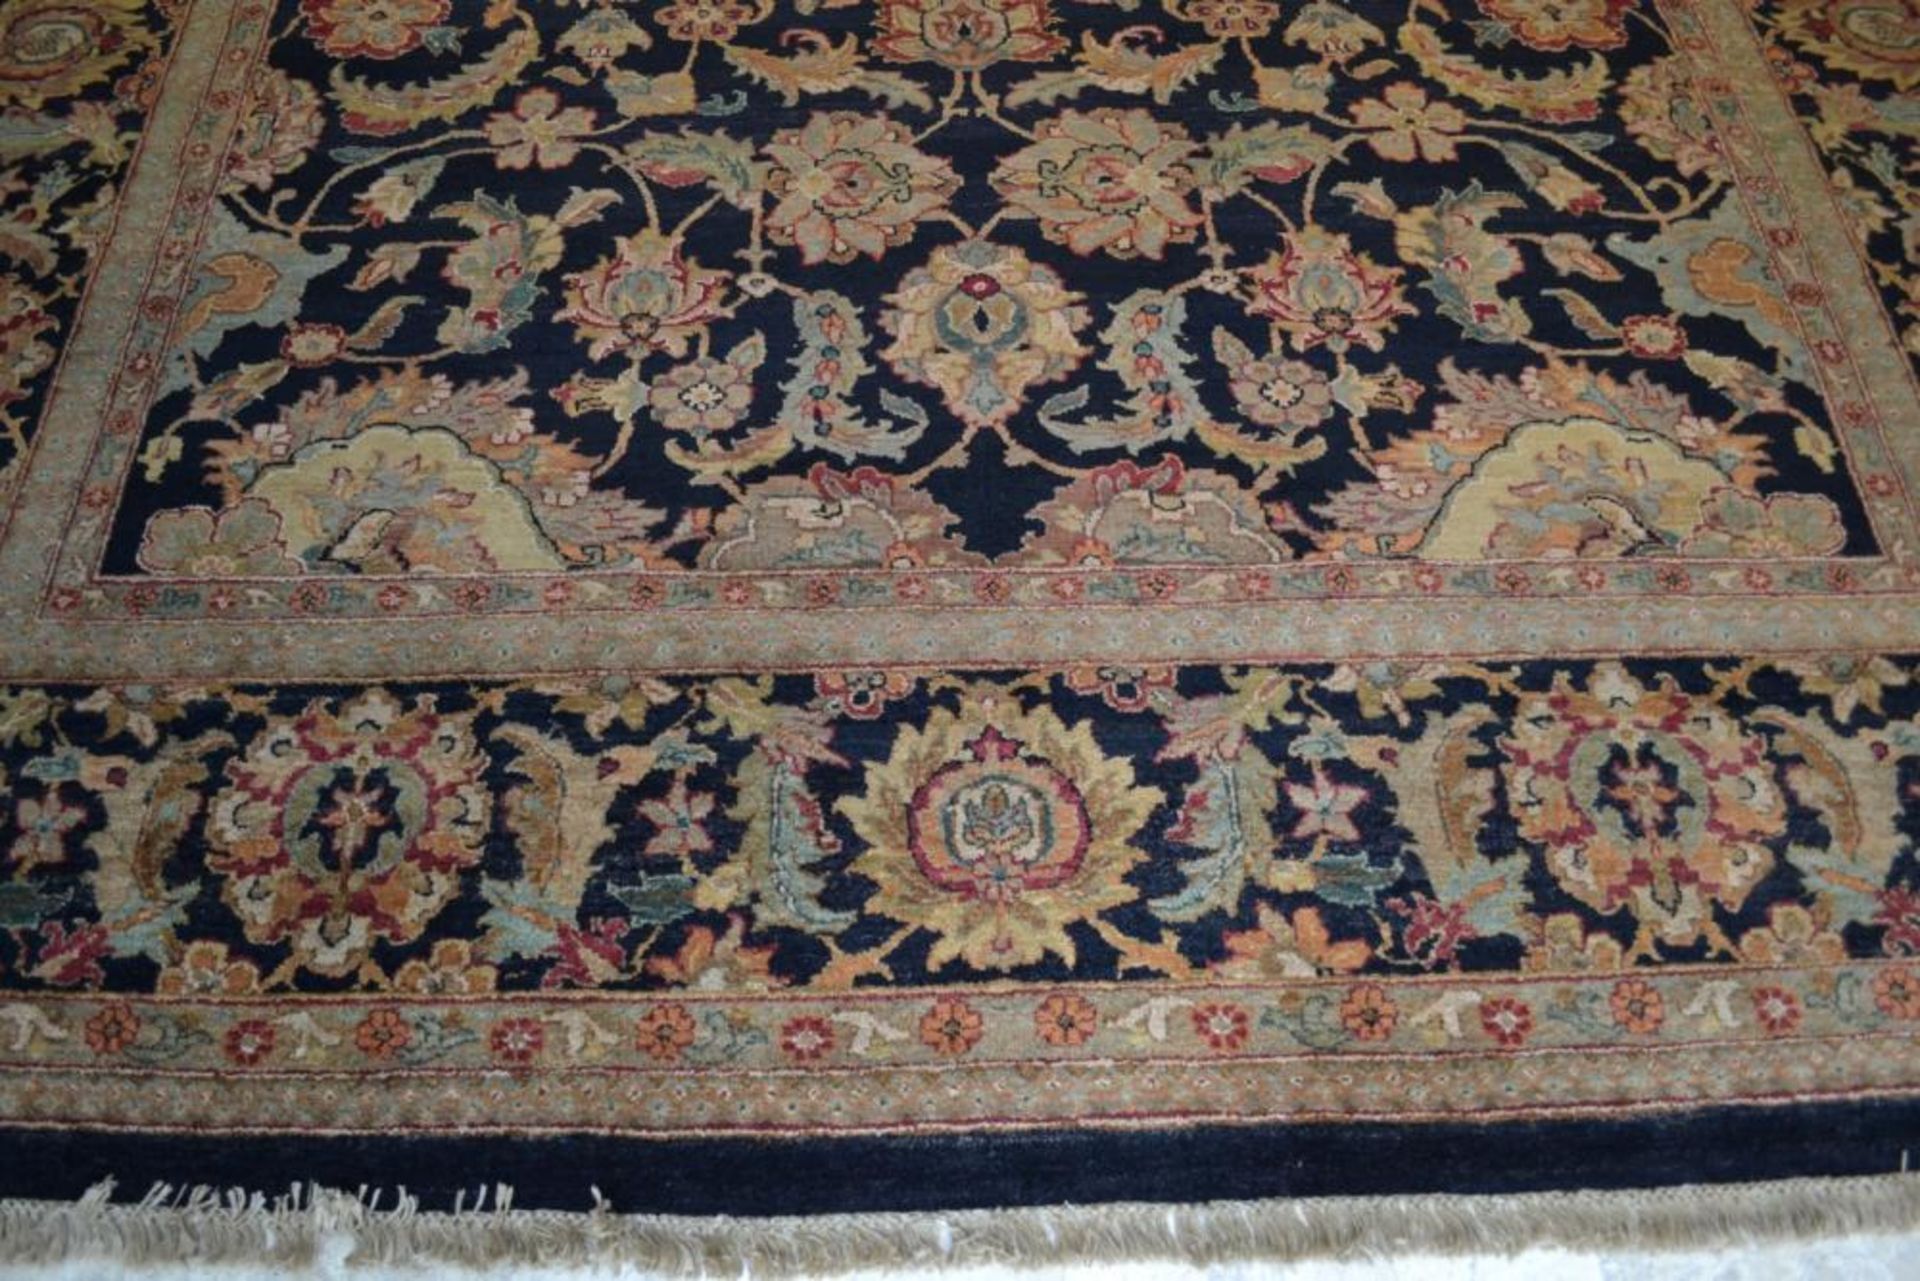 1 x Black Jaipur Handwoven Carpet - Made From Vegetable Dyed Handspun Wool - Dimensions: 367x277cm - - Image 8 of 16